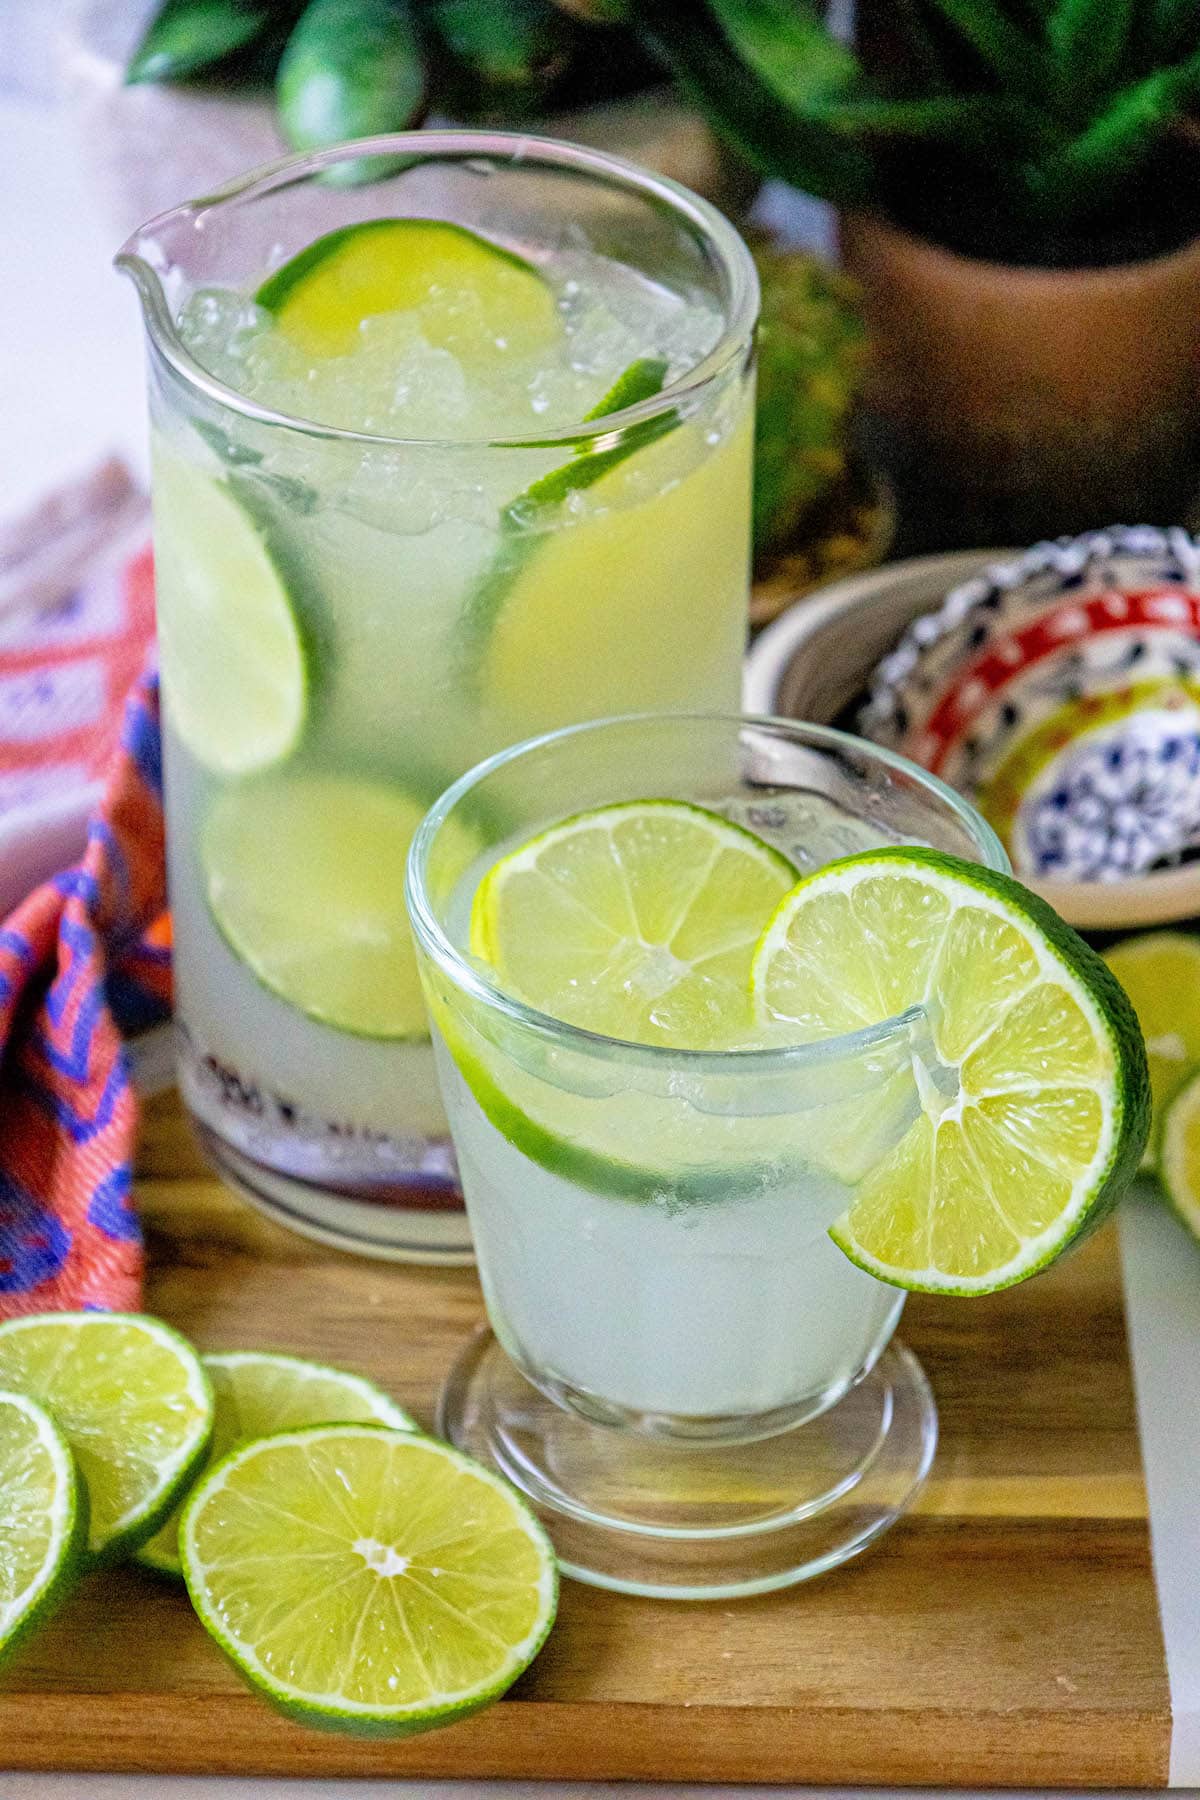 limeade in a glass with ice and sliced limes